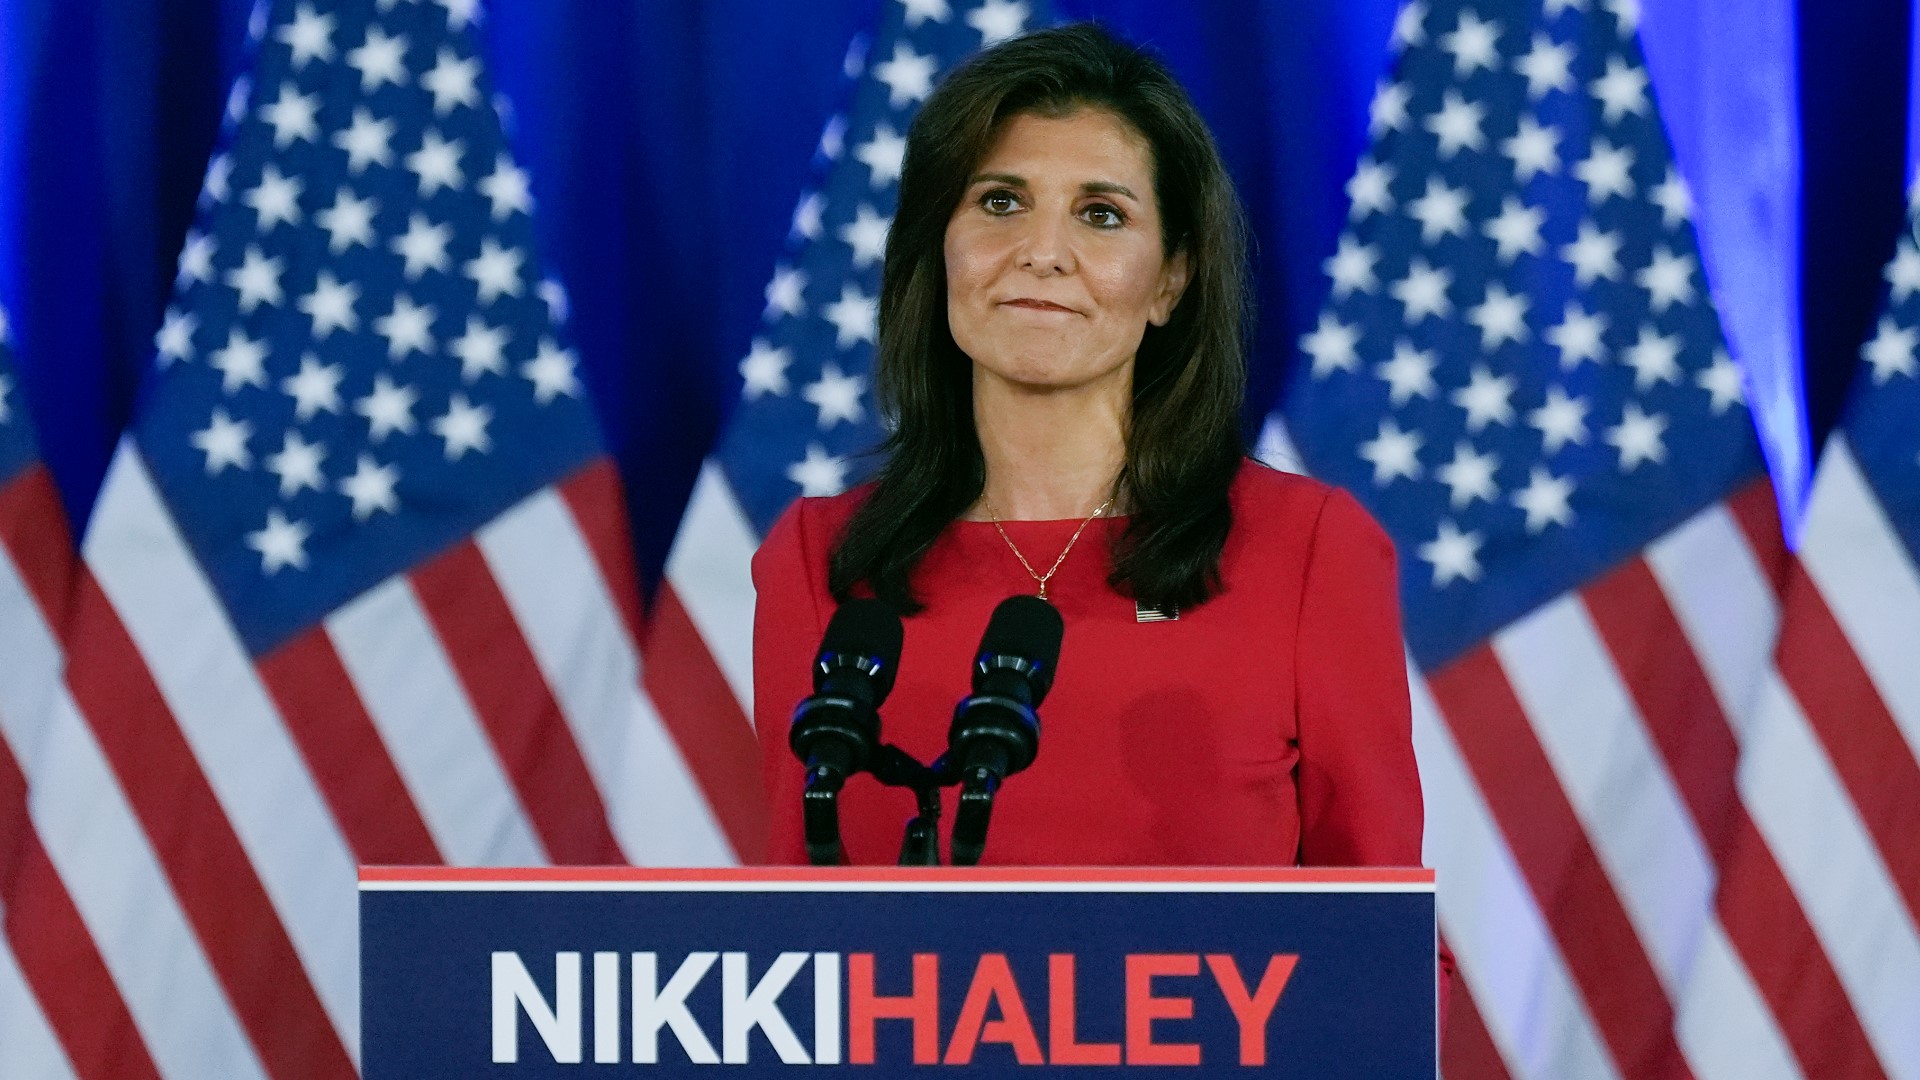 Nikki Haley has suspended her presidential campaign. Haley did not endorse former President Donald Trump on Wednesday.